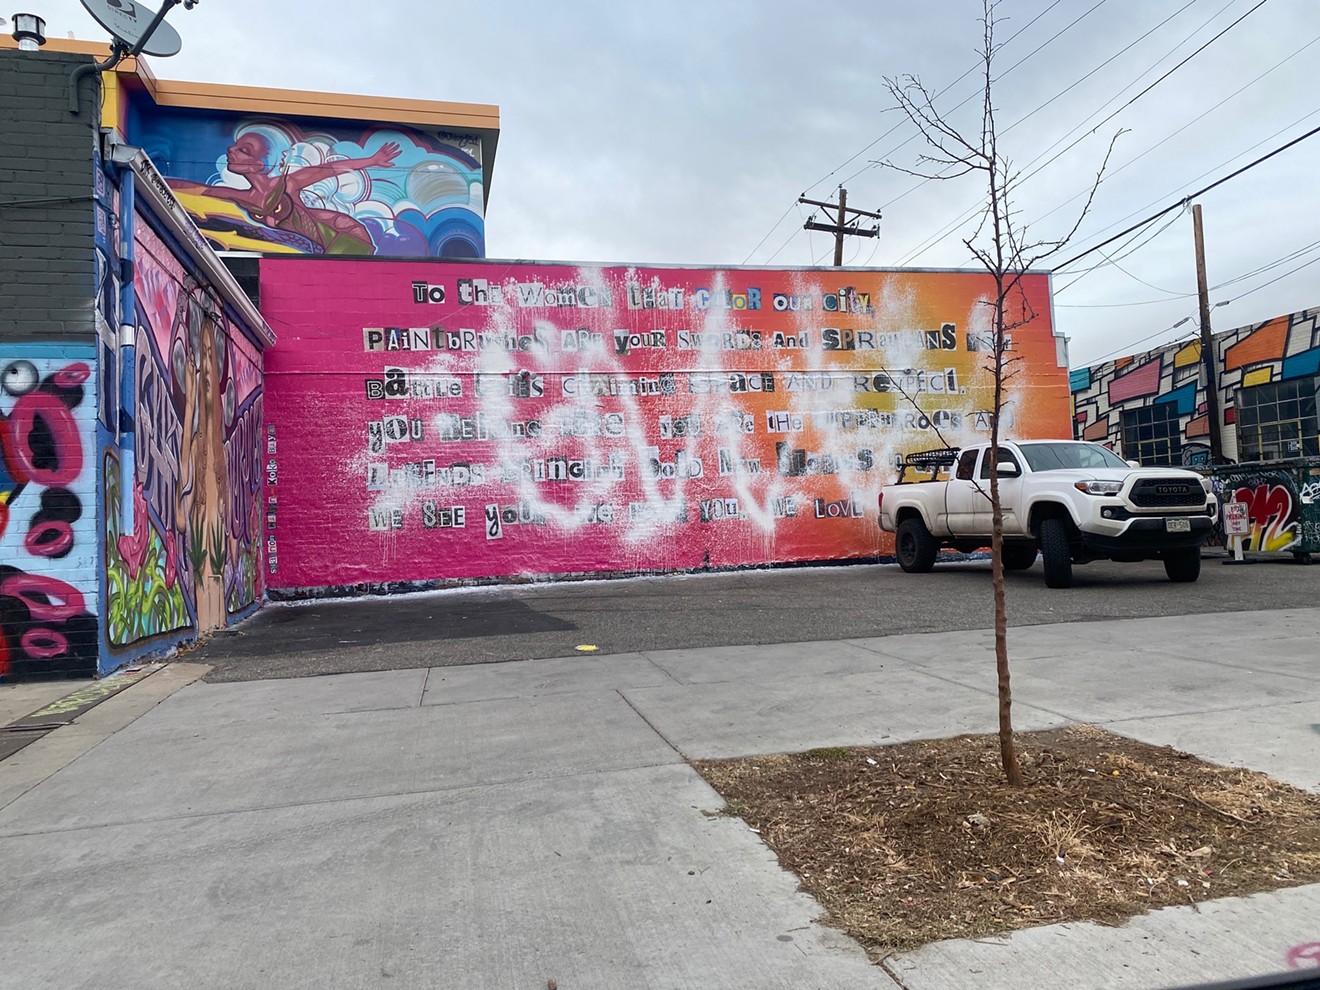 Shannon Galpin and Koko Bayer's mural on the side of American Bonded, vandalized.